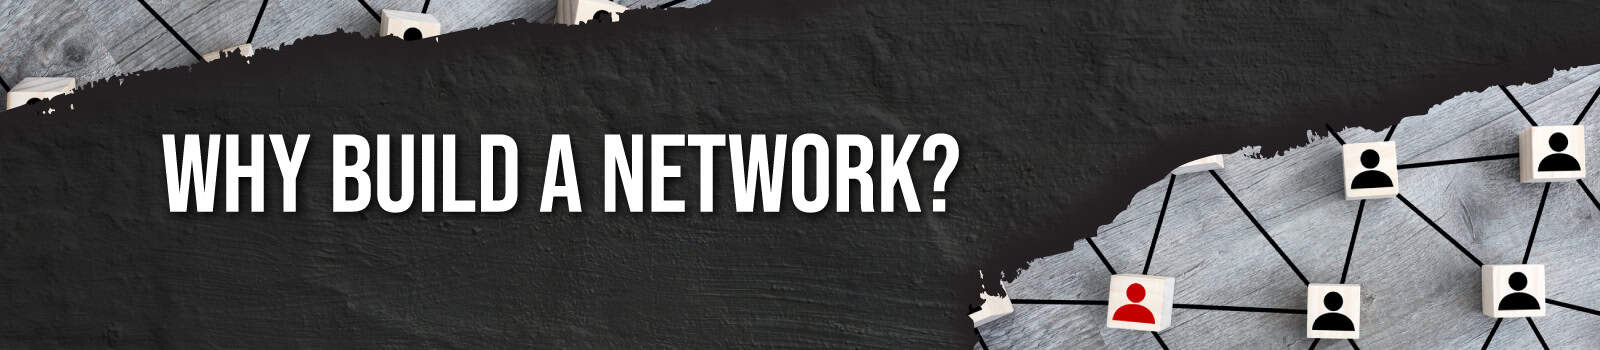 Why Build a Network?